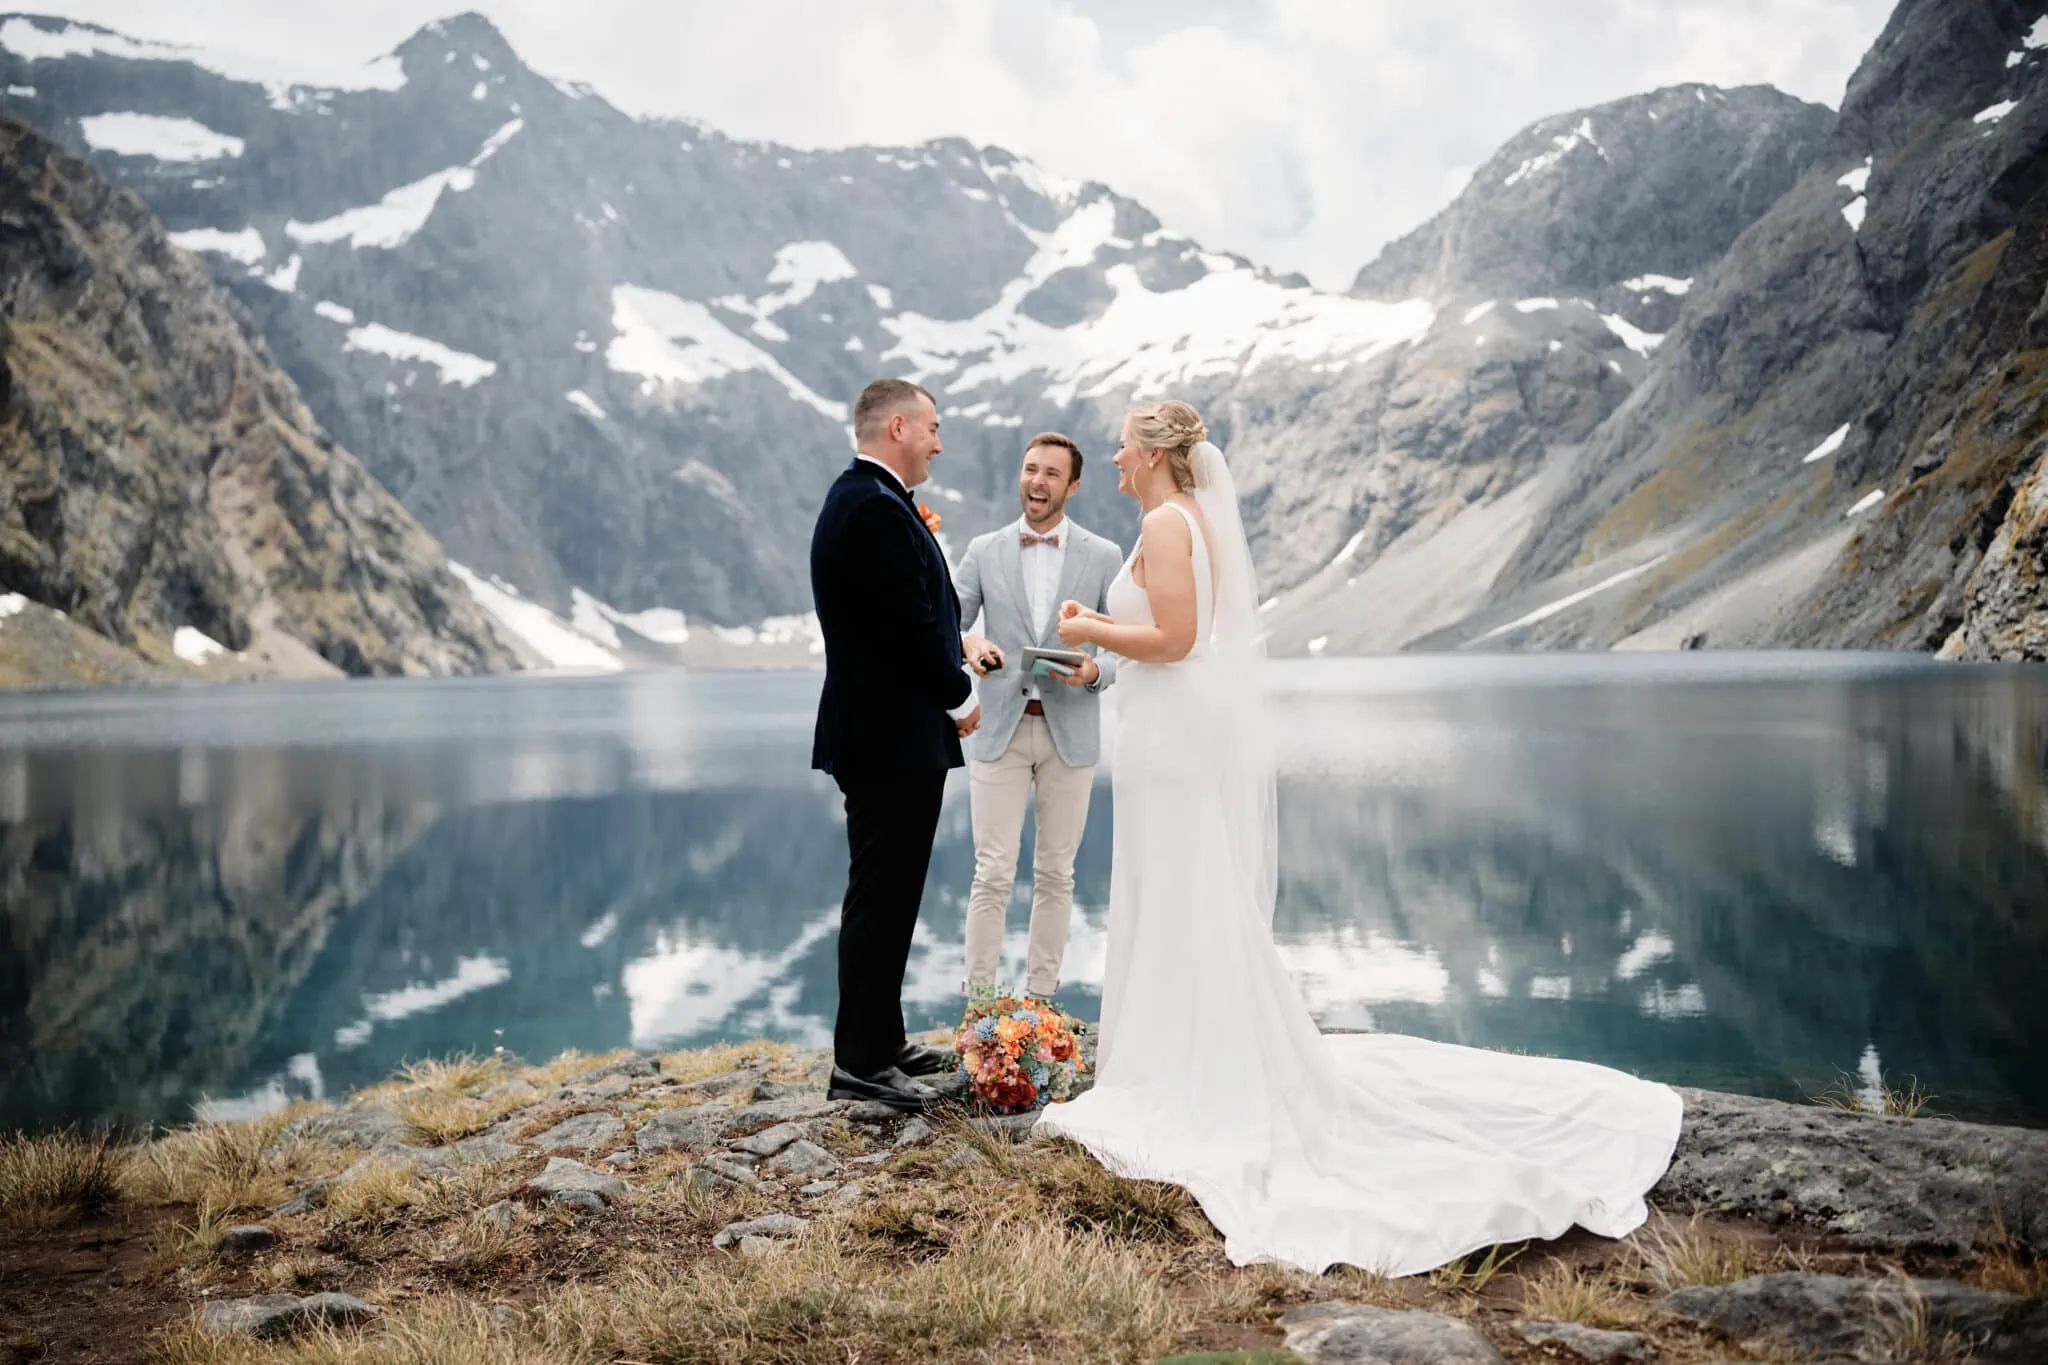 Queenstown New Zealand Elopement Wedding Photographer - An exclusive heli-elopement wedding package featuring a bride and groom standing in front of the majestic Lake Erskine in Fiordland, Queenstown New Zealand.